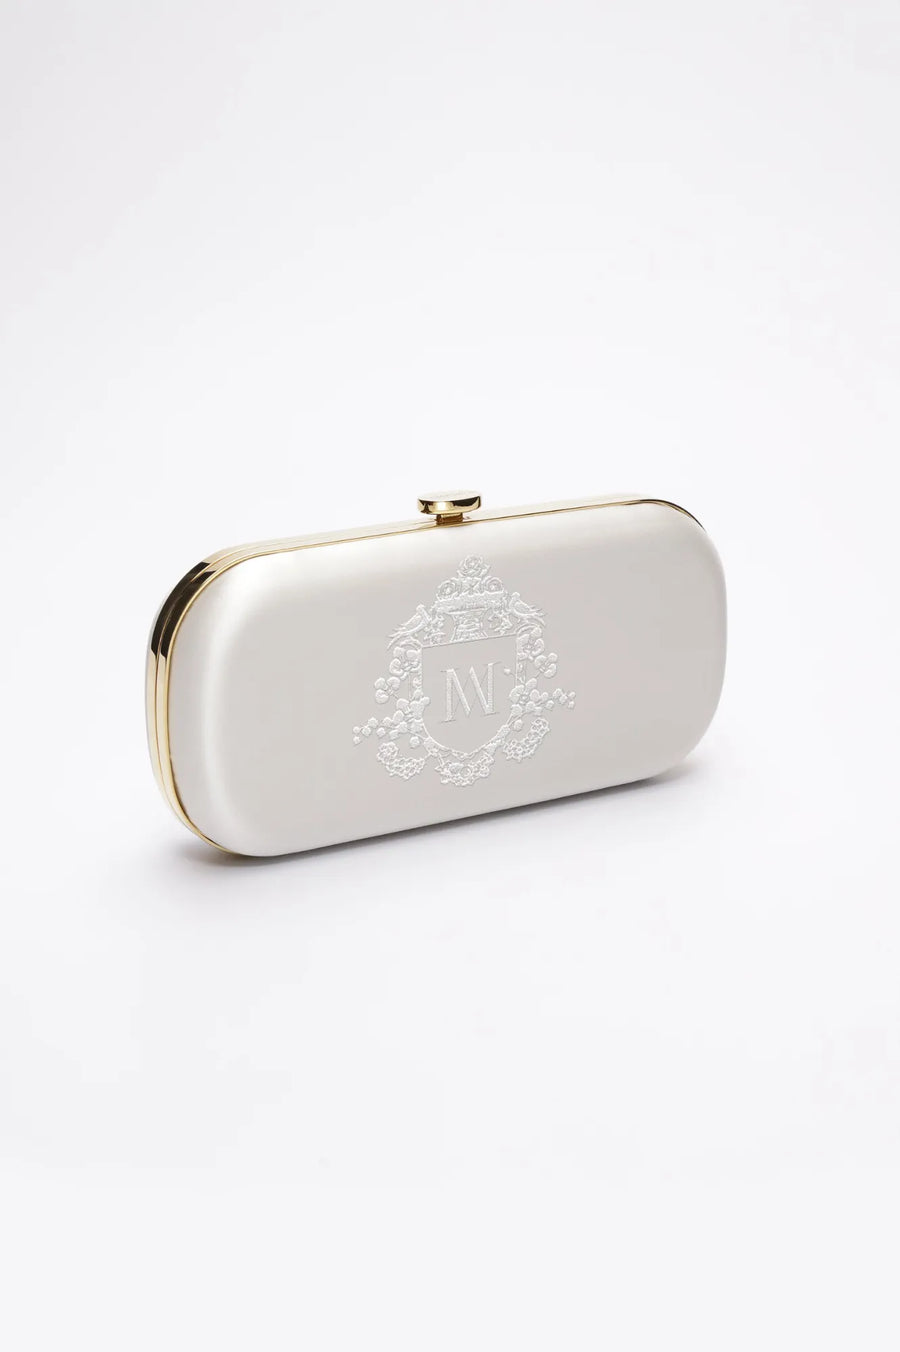 Side view of ivory satin Bella bridal clutch with gold hardware and white bridal monogram embroidery.